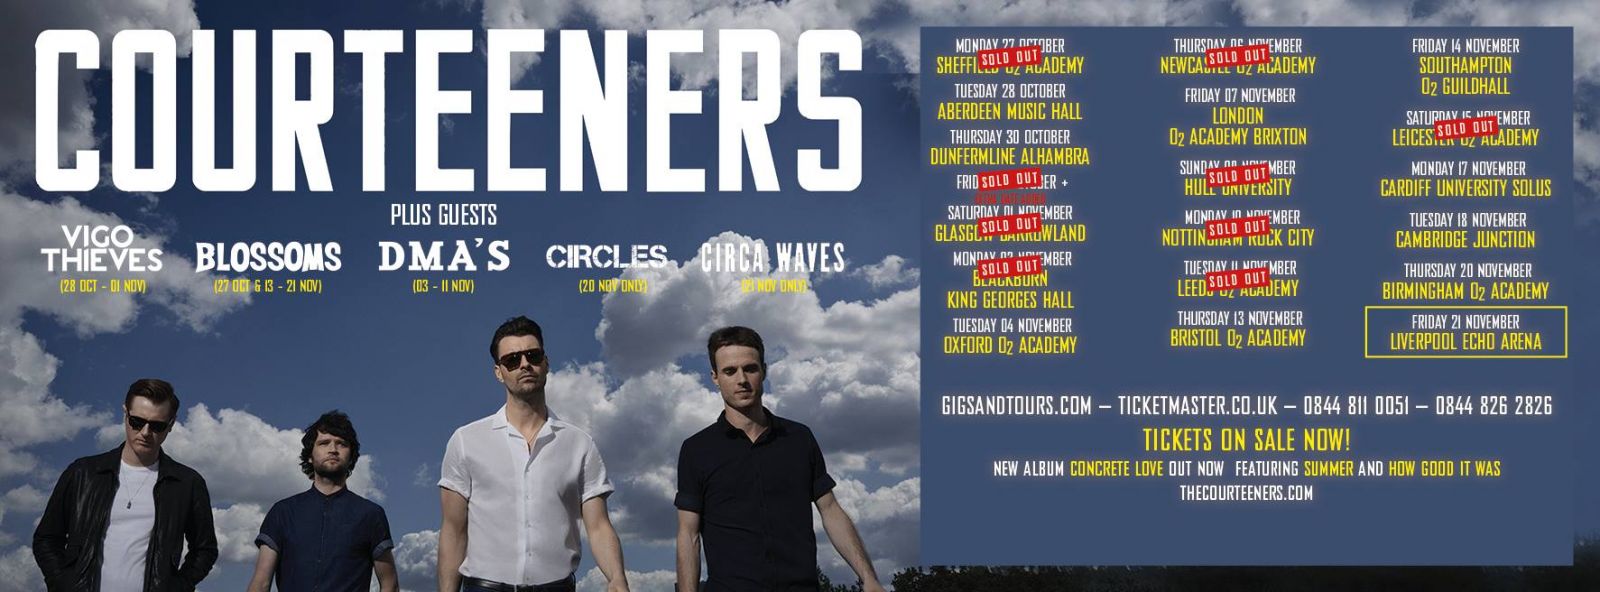 The Courteeners at O2 Academy in Bristol on 13 November 2014